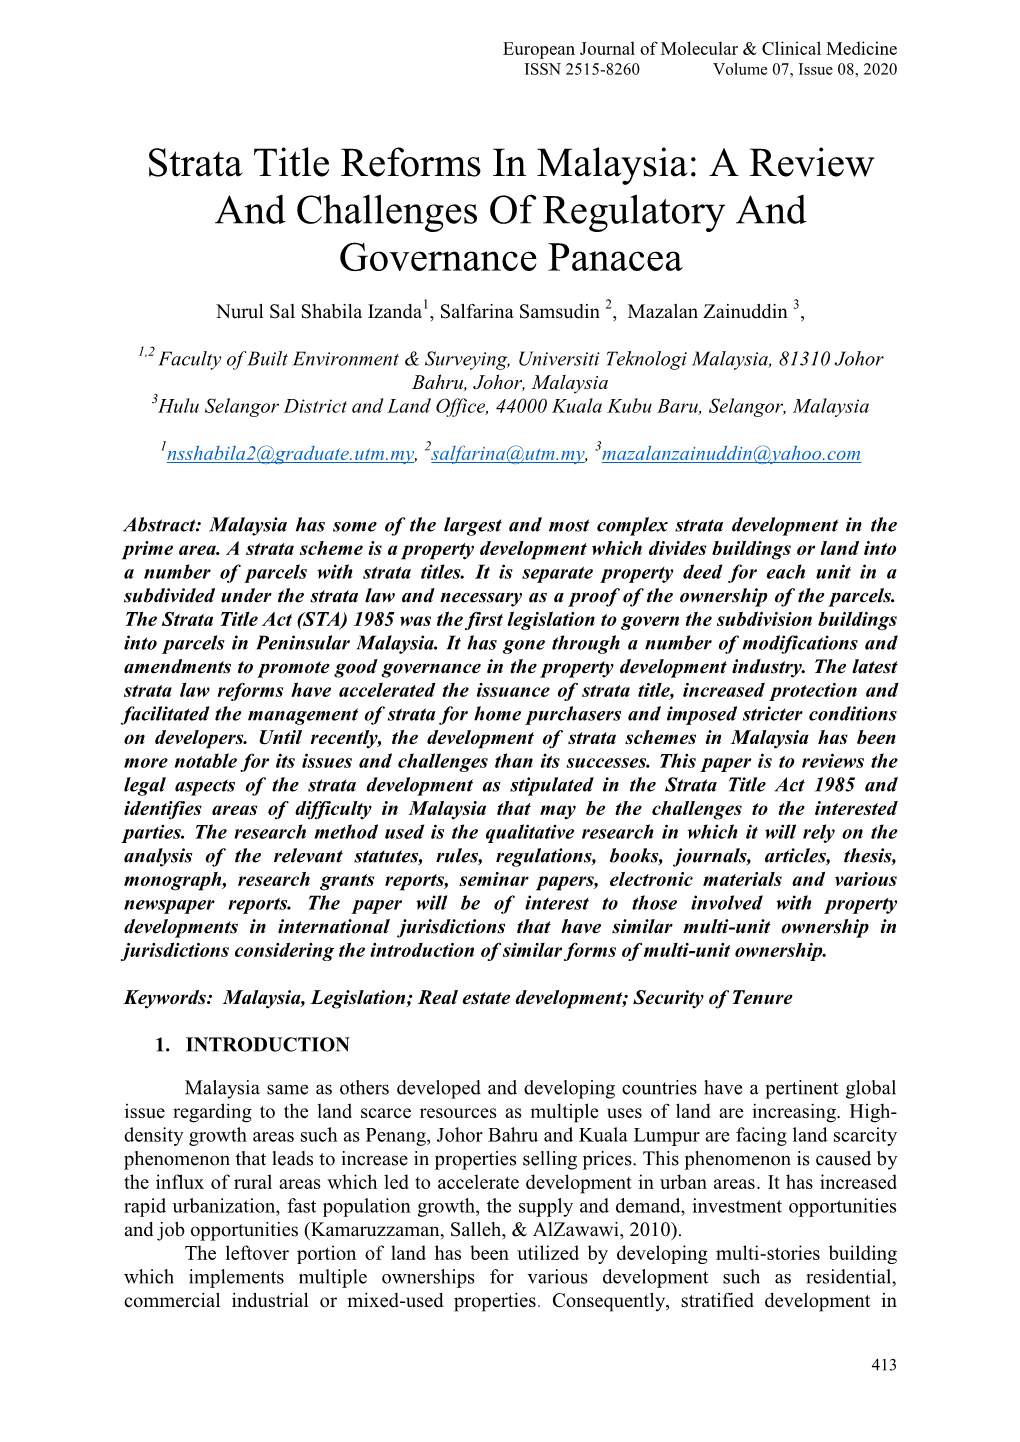 Strata Title Reforms in Malaysia: a Review and Challenges of Regulatory and Governance Panacea